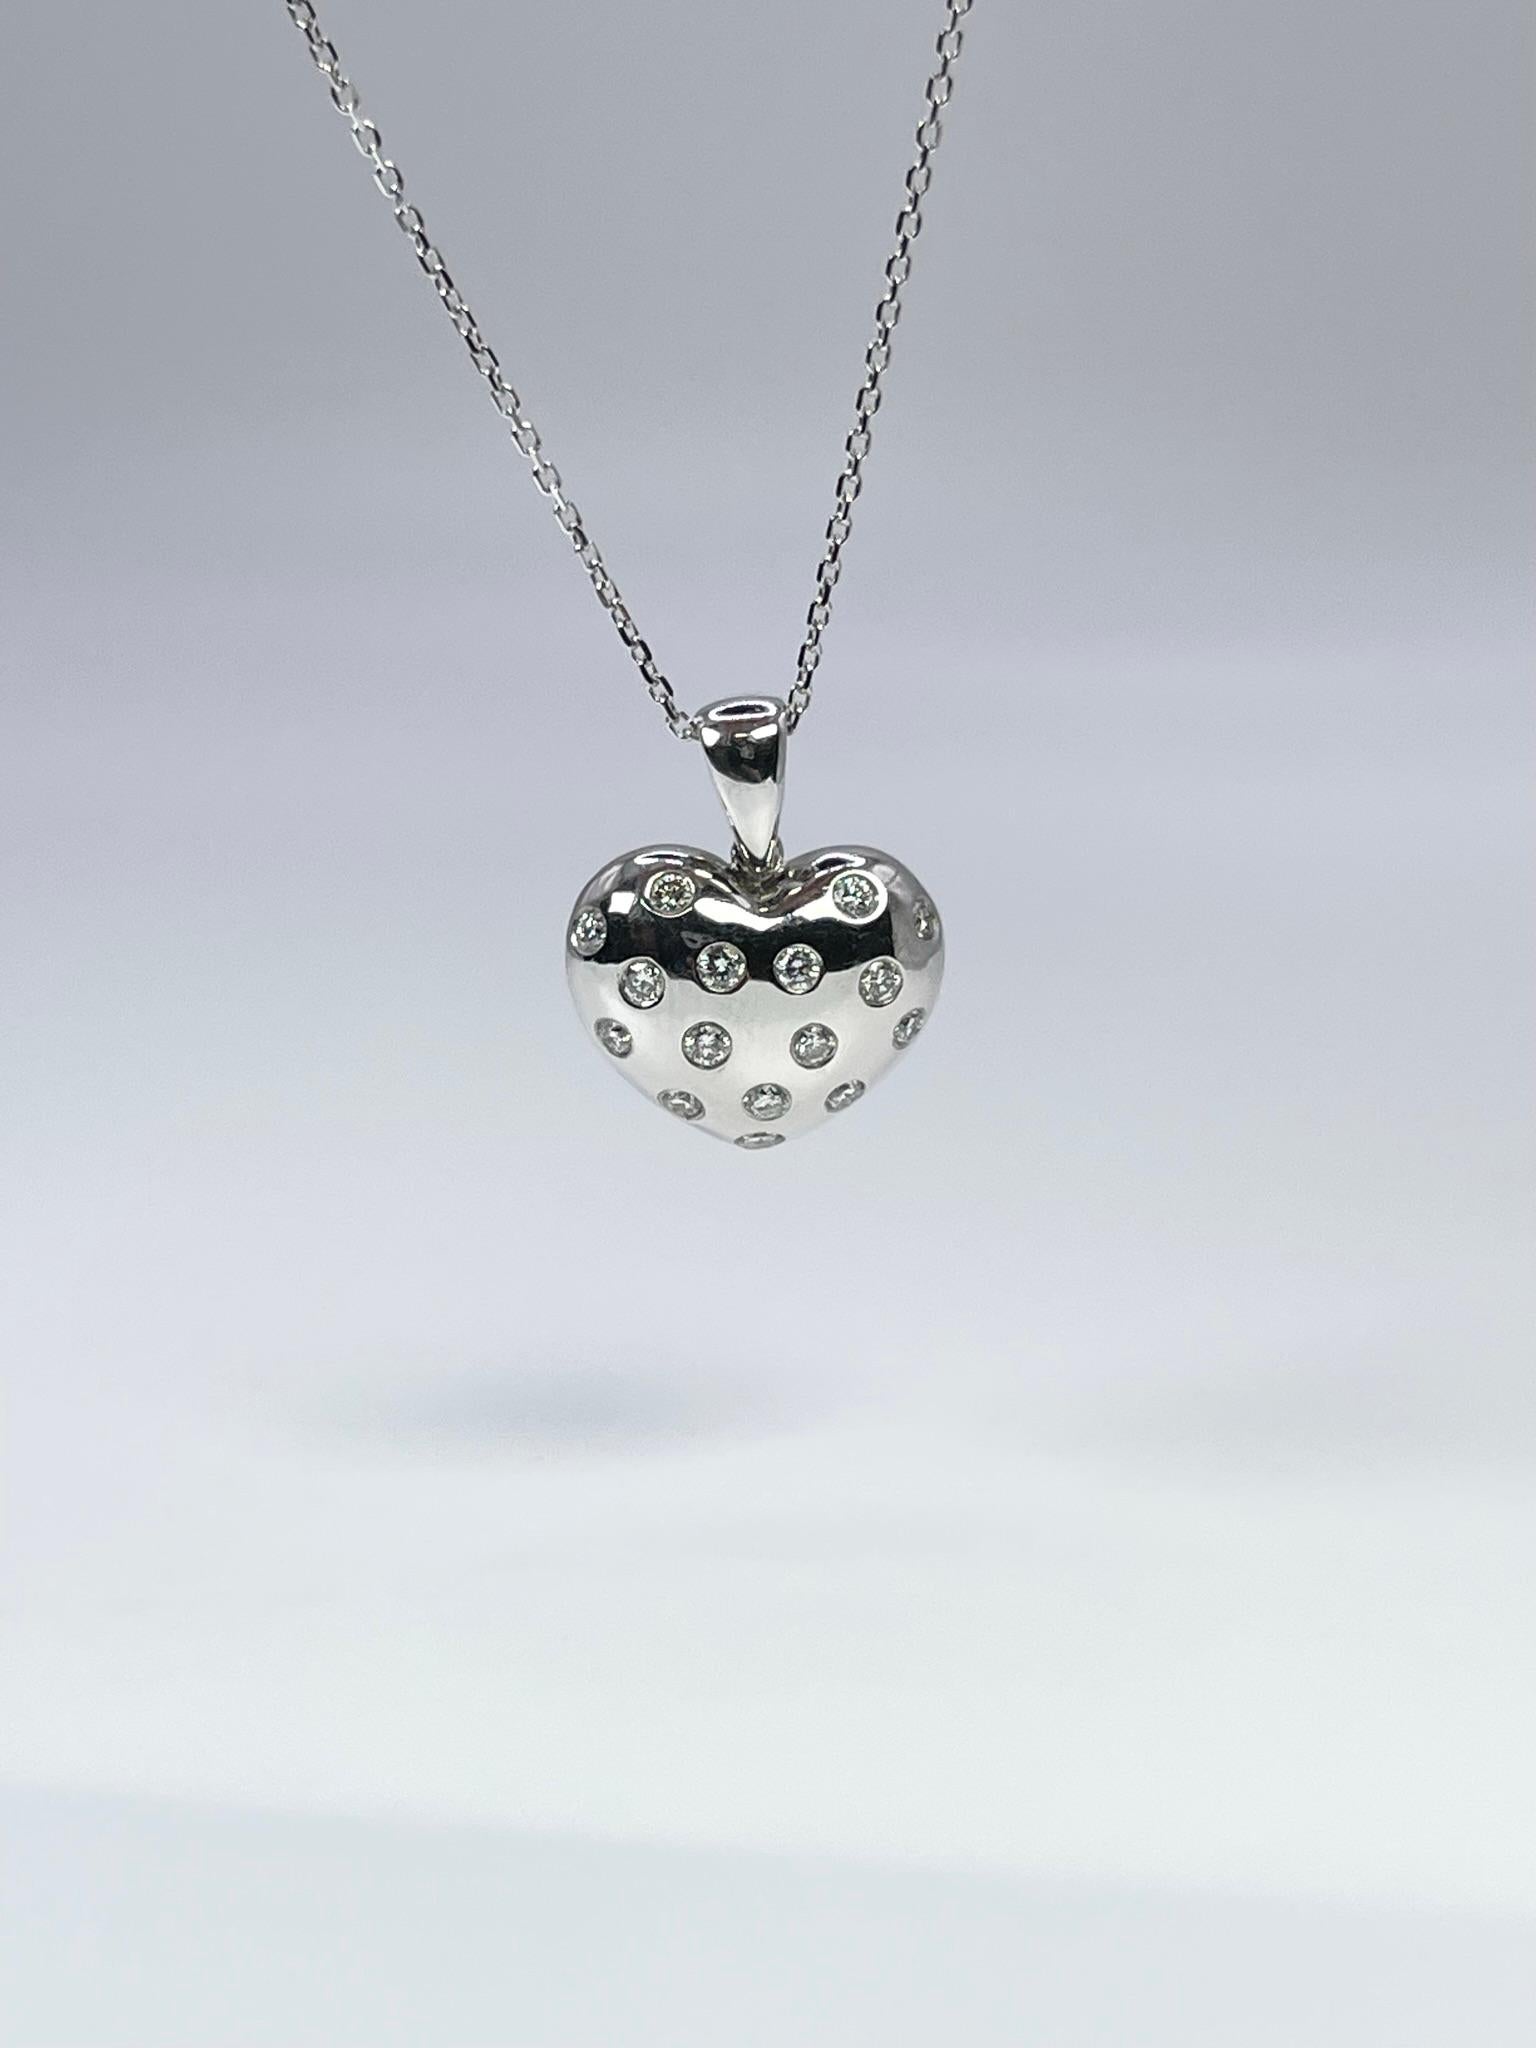 Puffed heart pendant necklace in 14KT white gold.

GRAM WEIGHT: 5.34gr
GOLD: 14KT white gold
NECKLACE-18